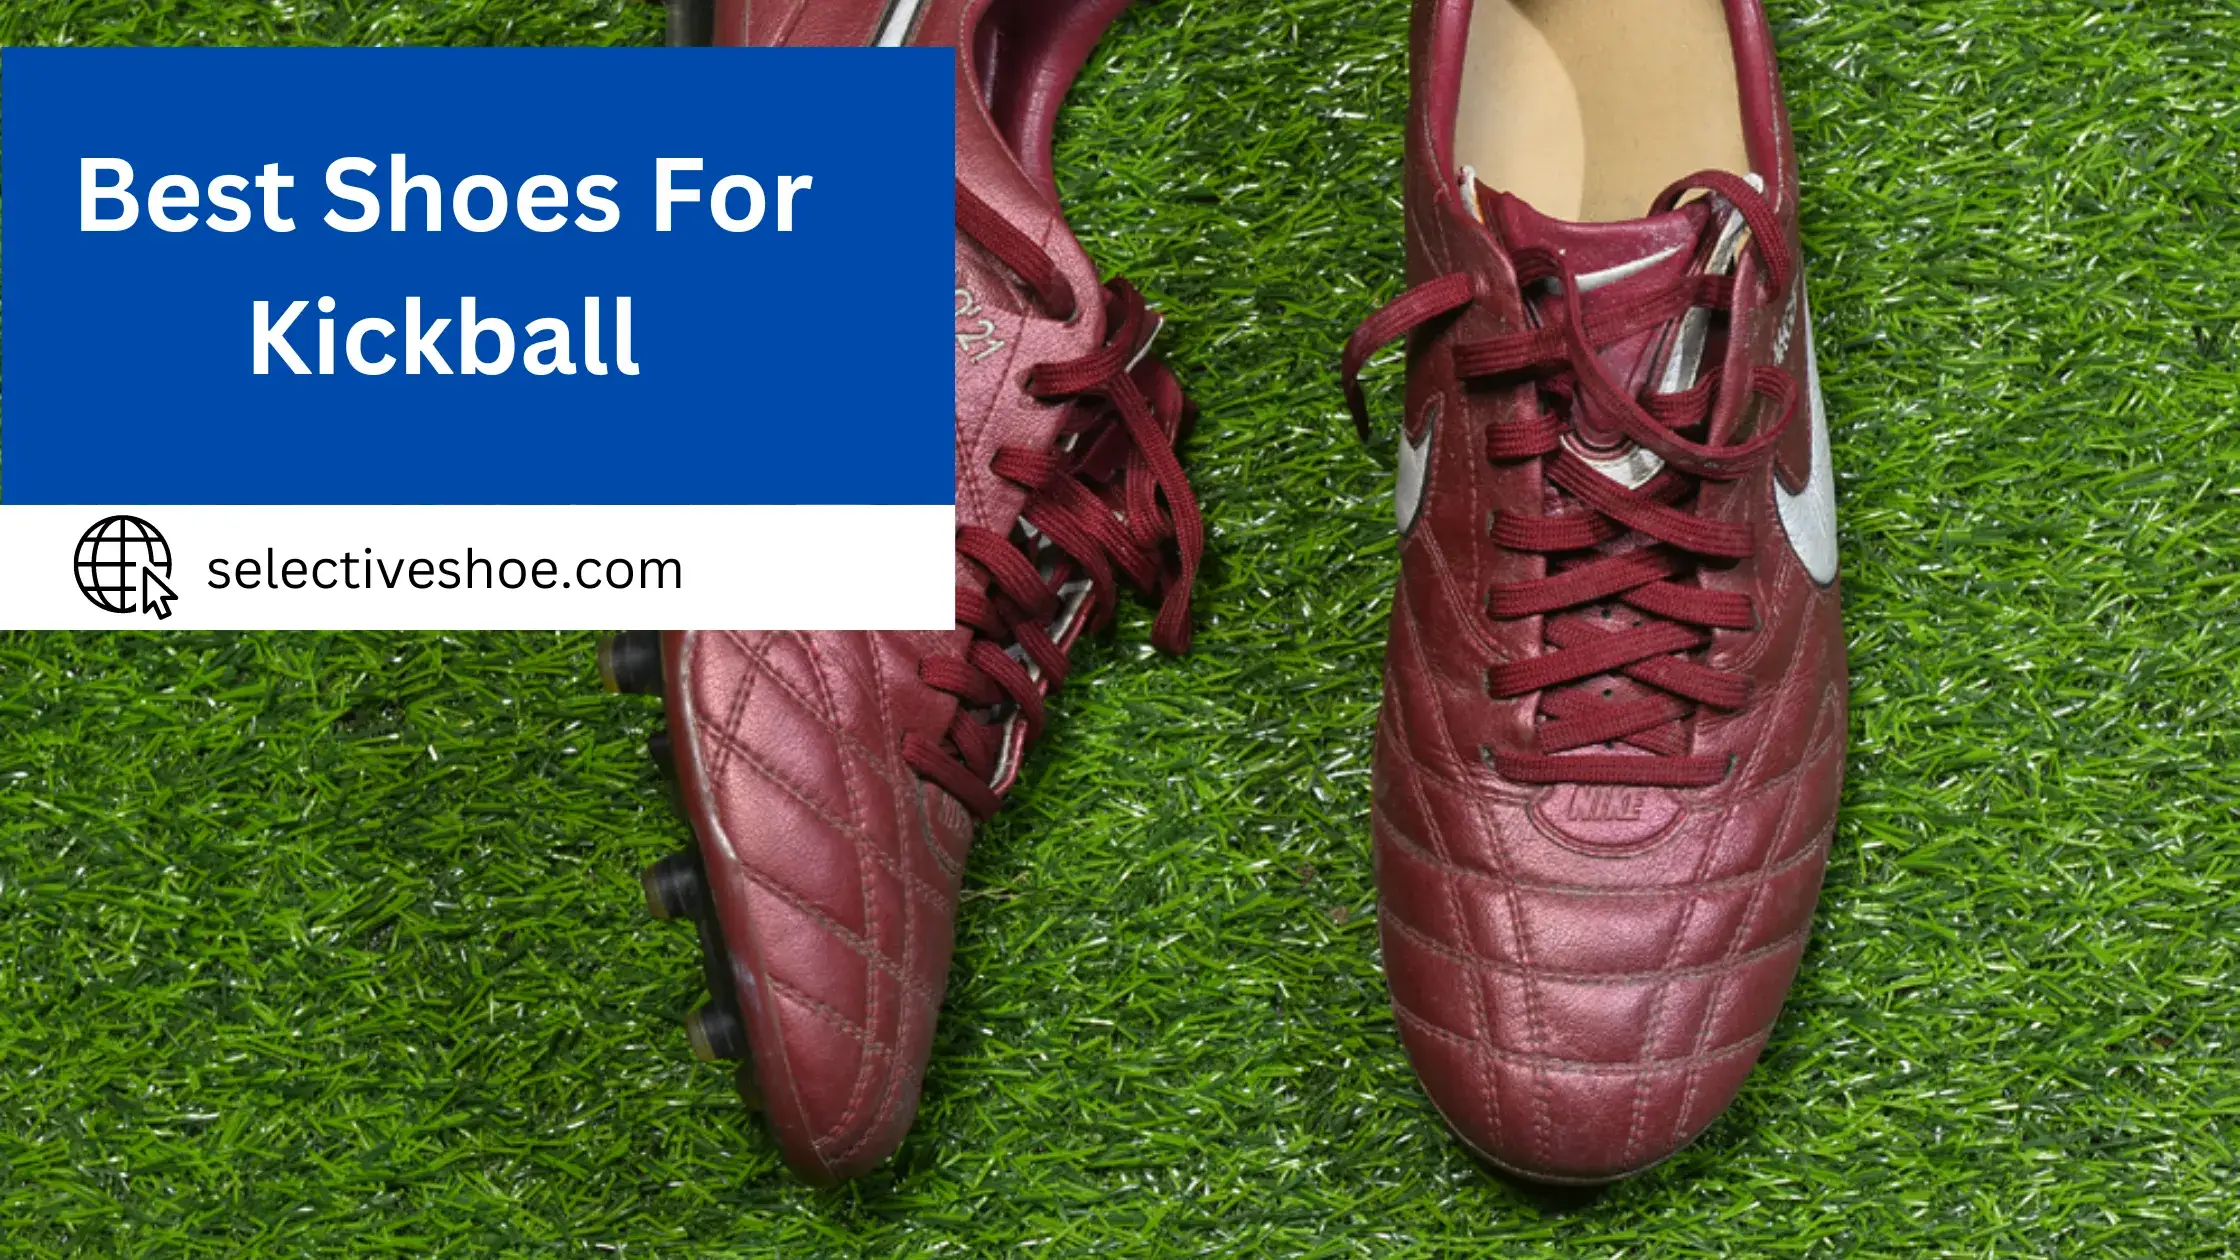 Best Shoes For Kickball - (An In-Depth Guide)